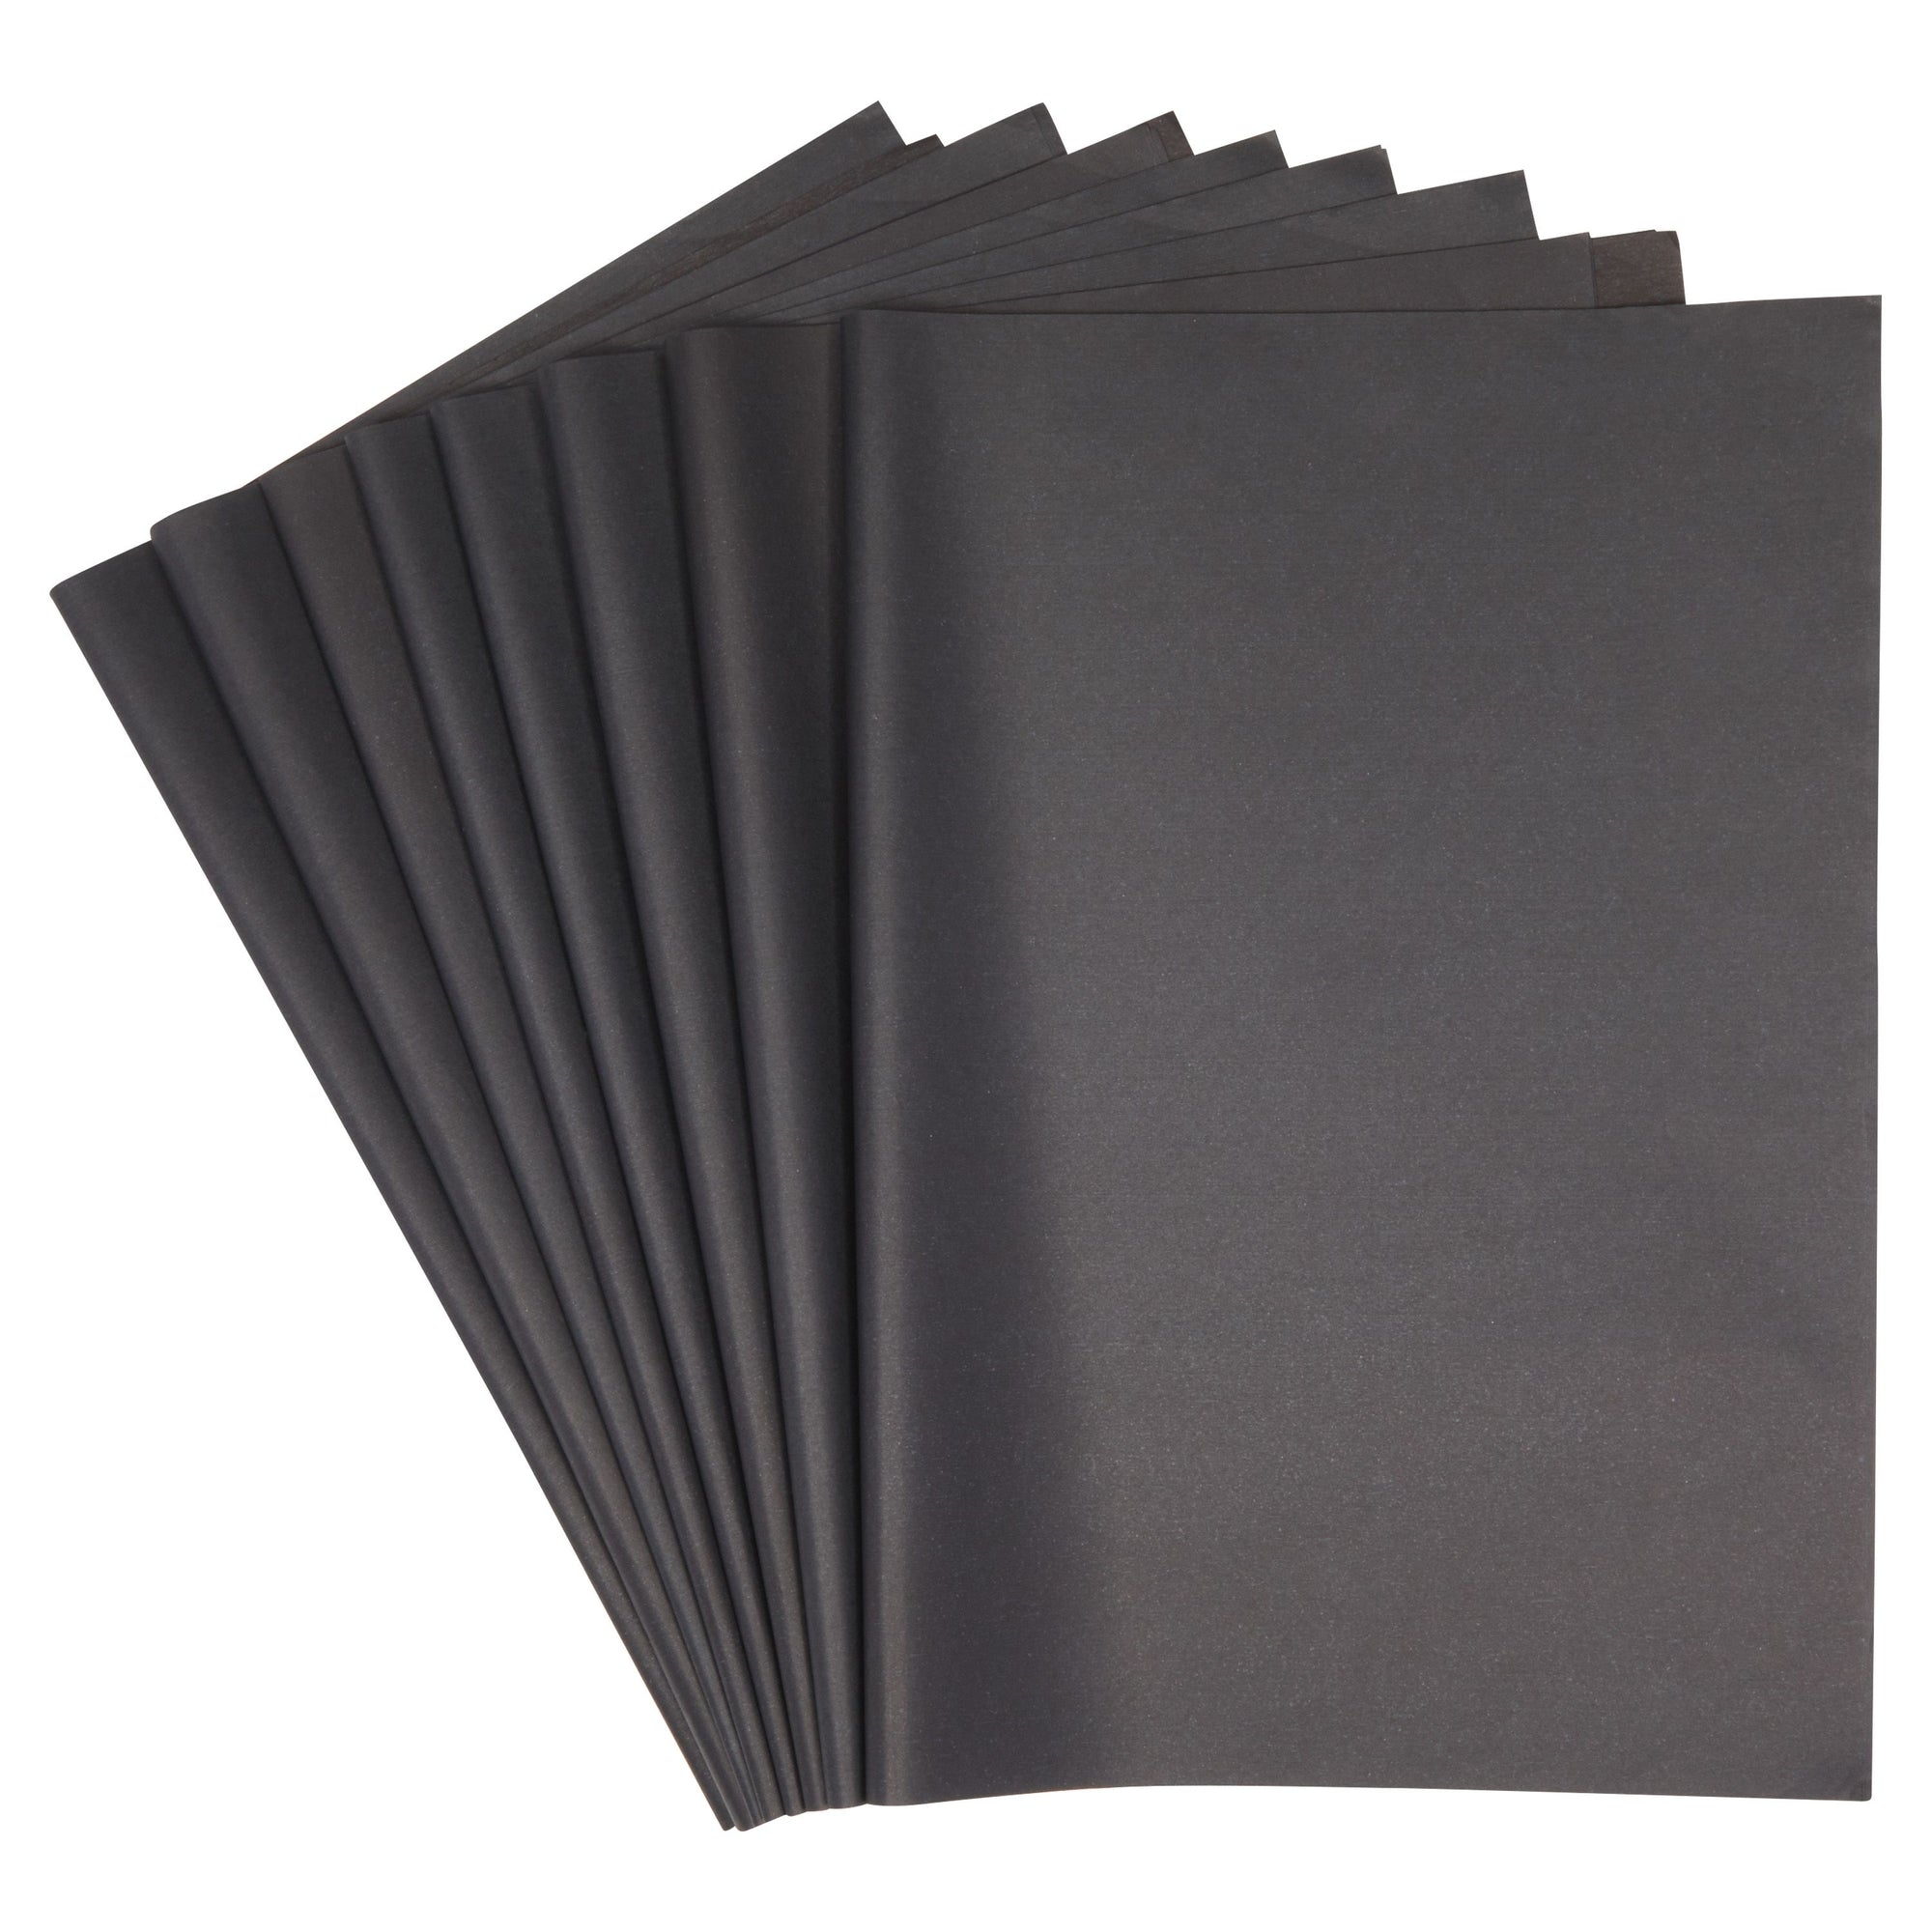 160 Sheets Black Tissue Paper for Gift Wrapping Bags, Bulk Set for Birthday  Party, Holidays, Art Crafts, 15 x 20 Inches